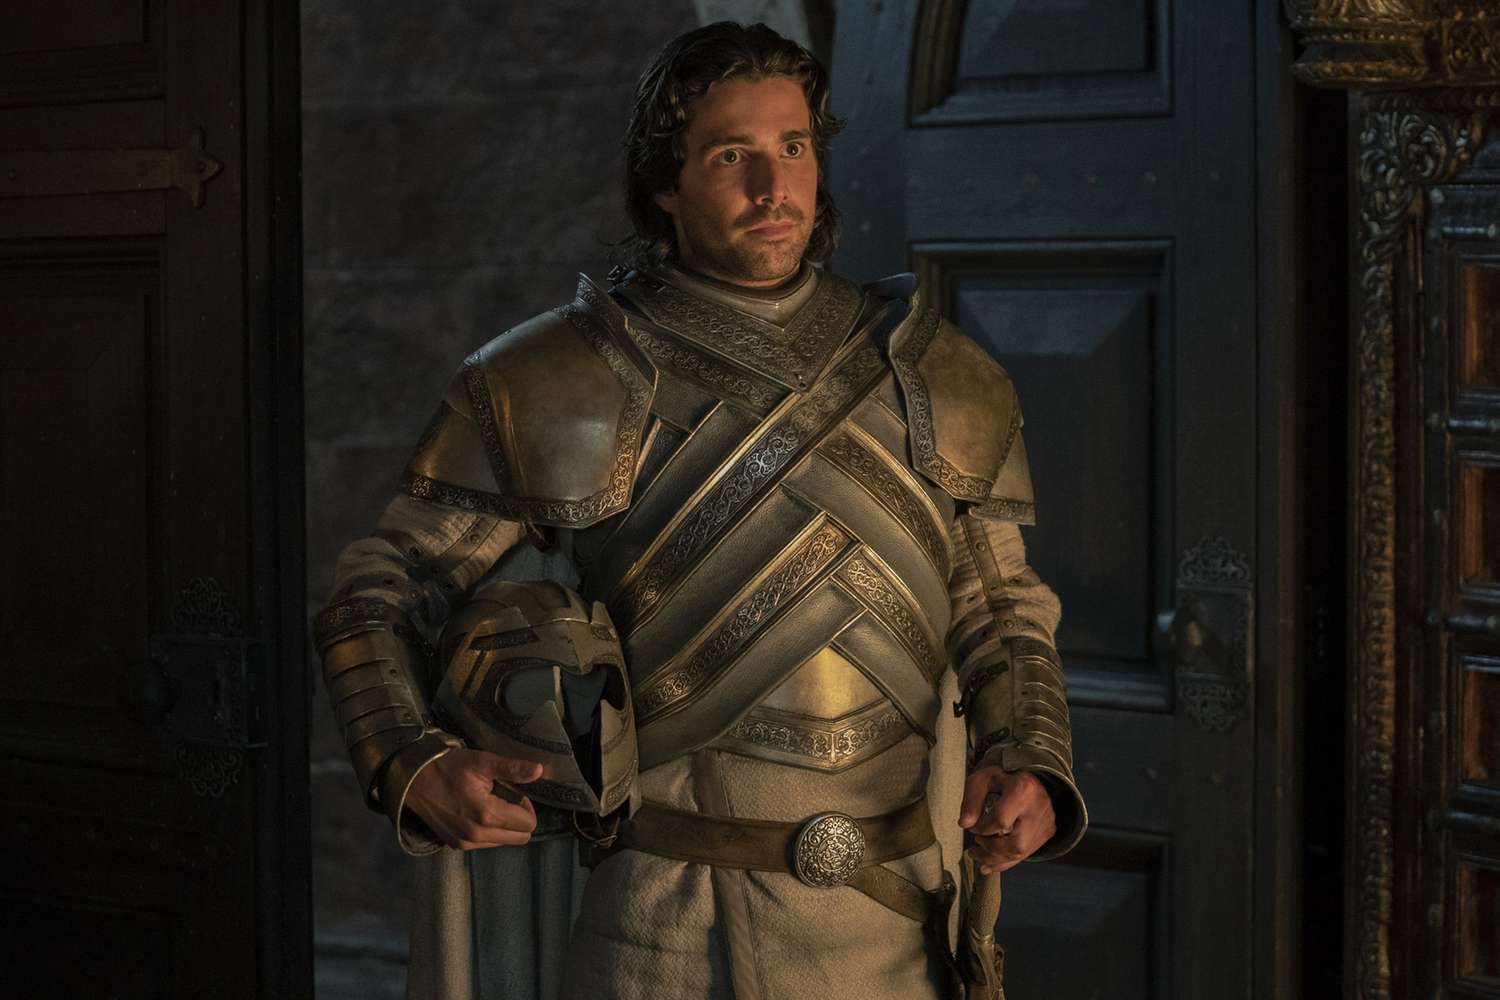 Fabien Frankel shows Criston Cole's true nature on 'House of the Dragon' - Entertainment Weekly News